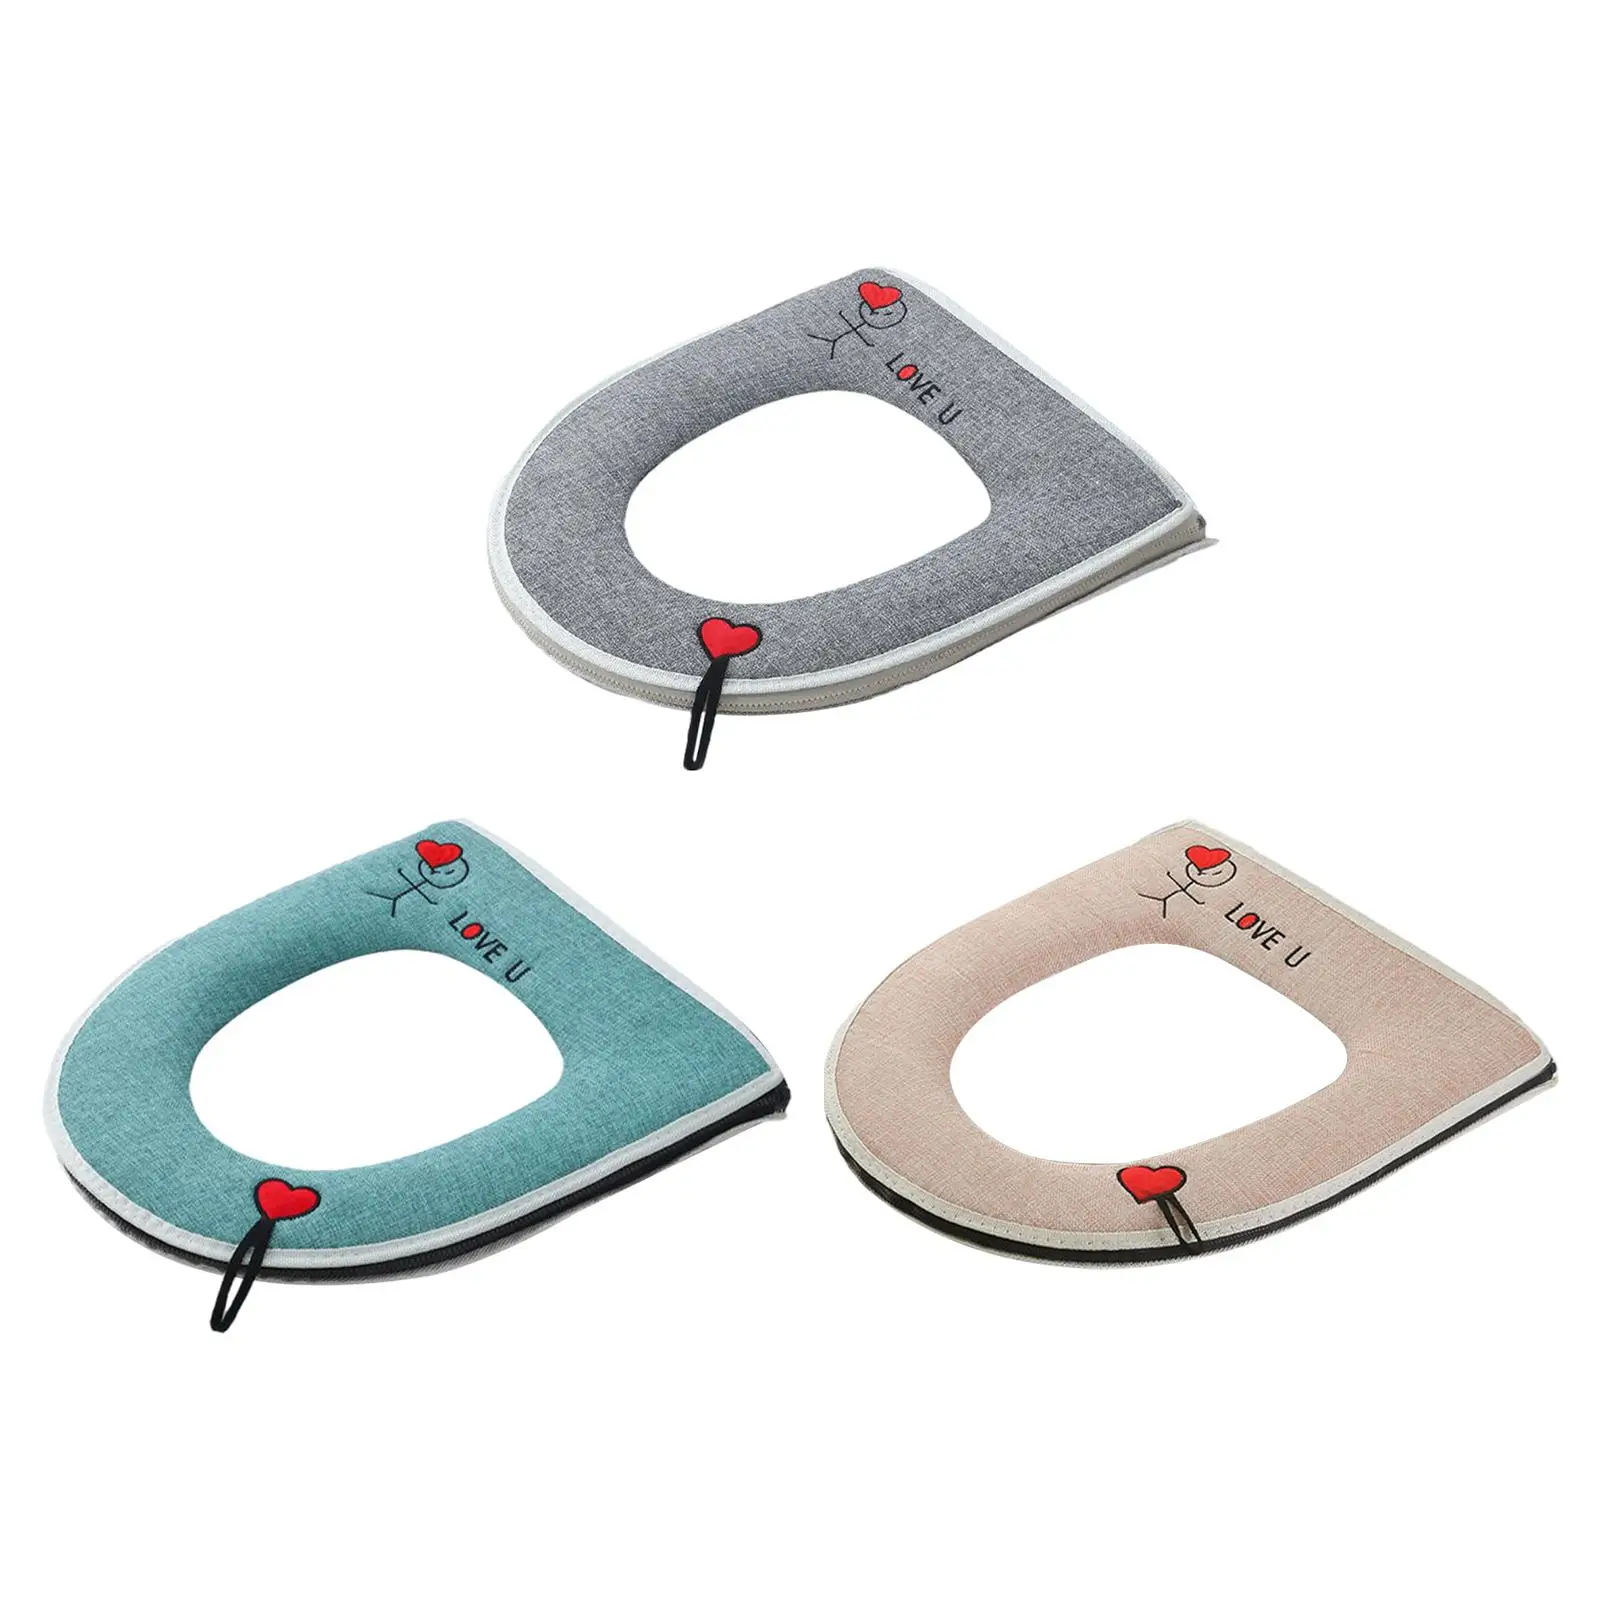 Thicken Toilet Seat Cushion Breatheable Portable Toilet Seat Cover Universal Toilet Seat Mat for Traveling Bathroom Hotel Home